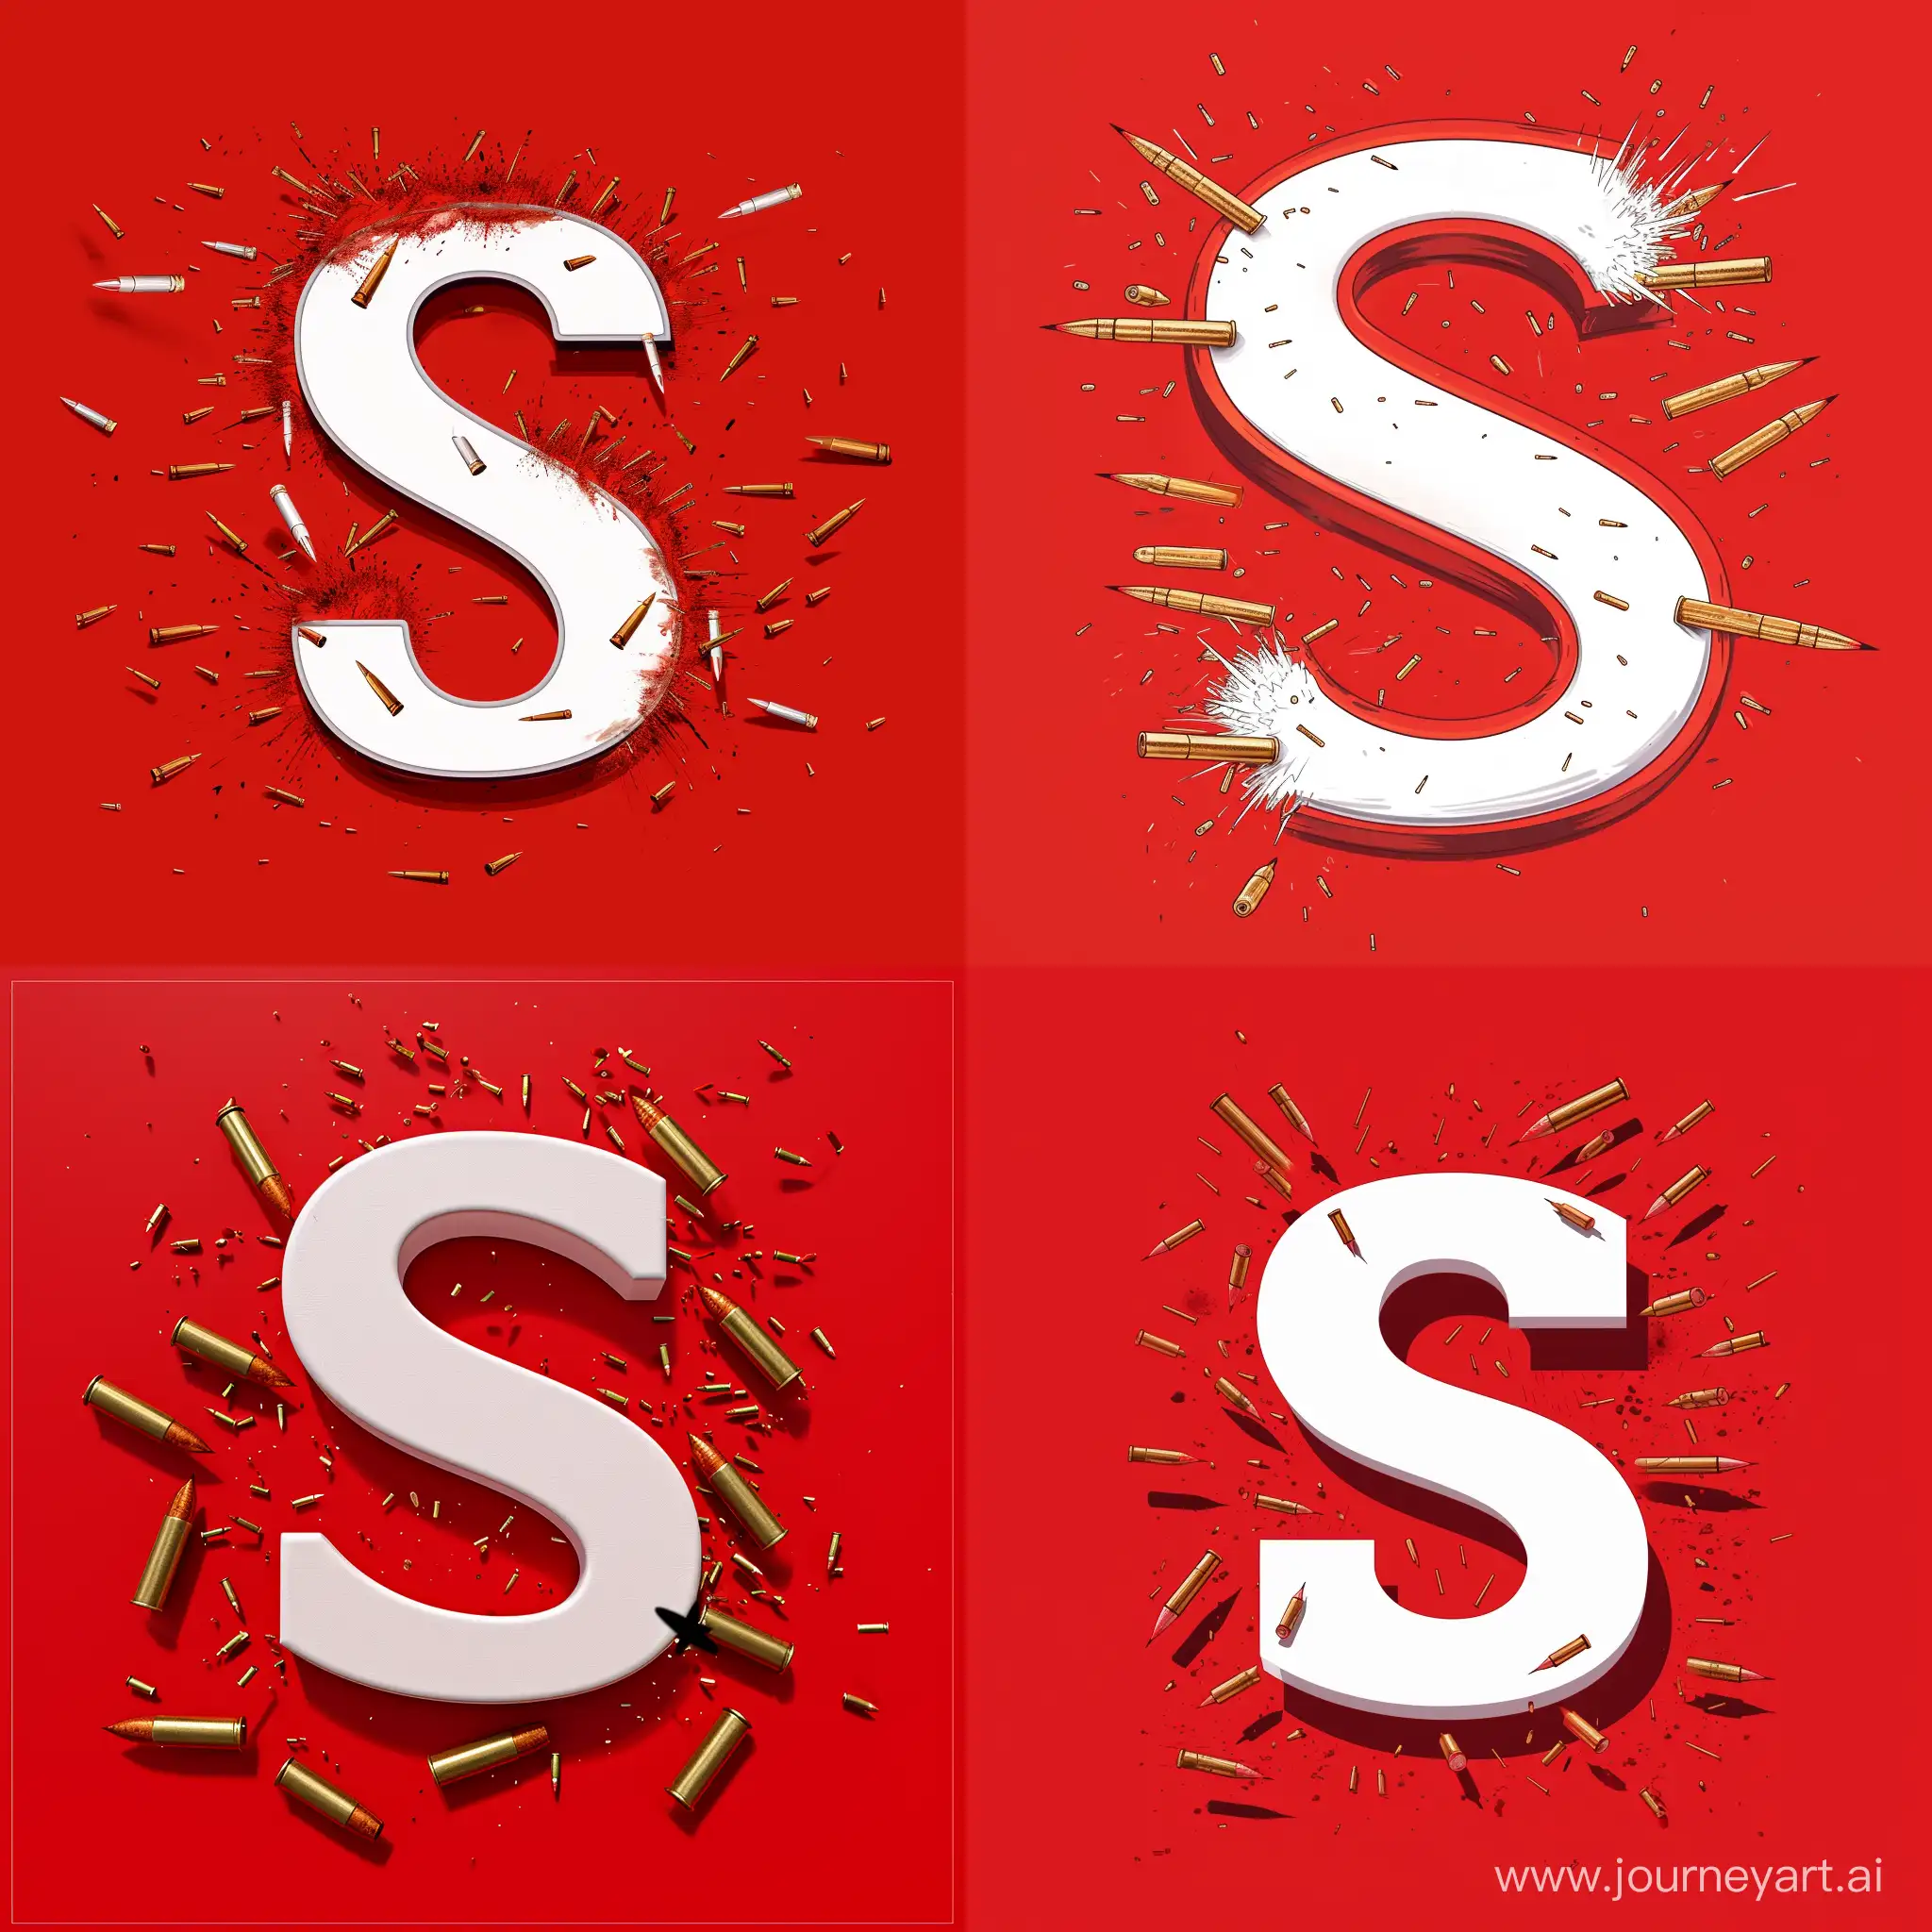 Intense-War-Scene-Letter-S-Amidst-Bullet-Chaos-on-Red-Background